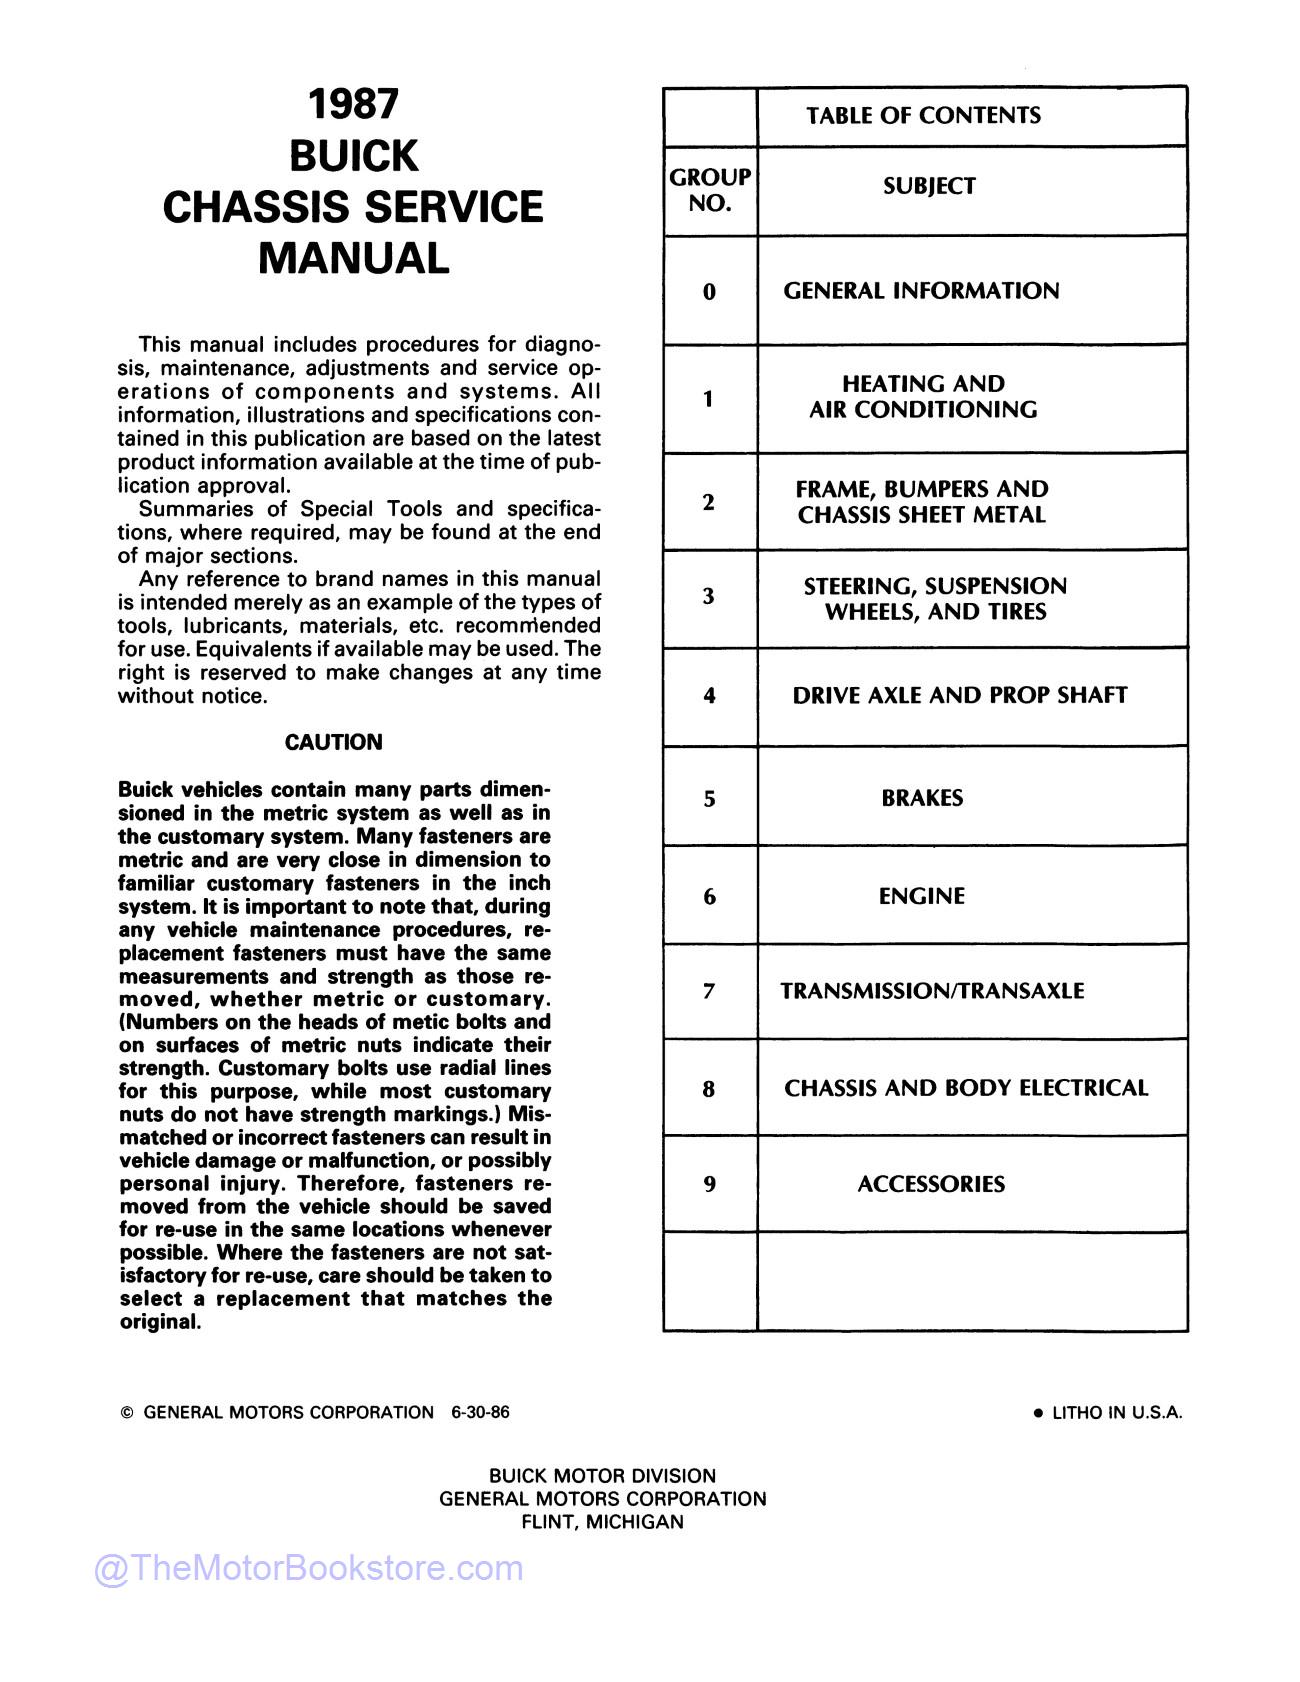 1987 Buick and Grand National Service Manual  - Table of Contents